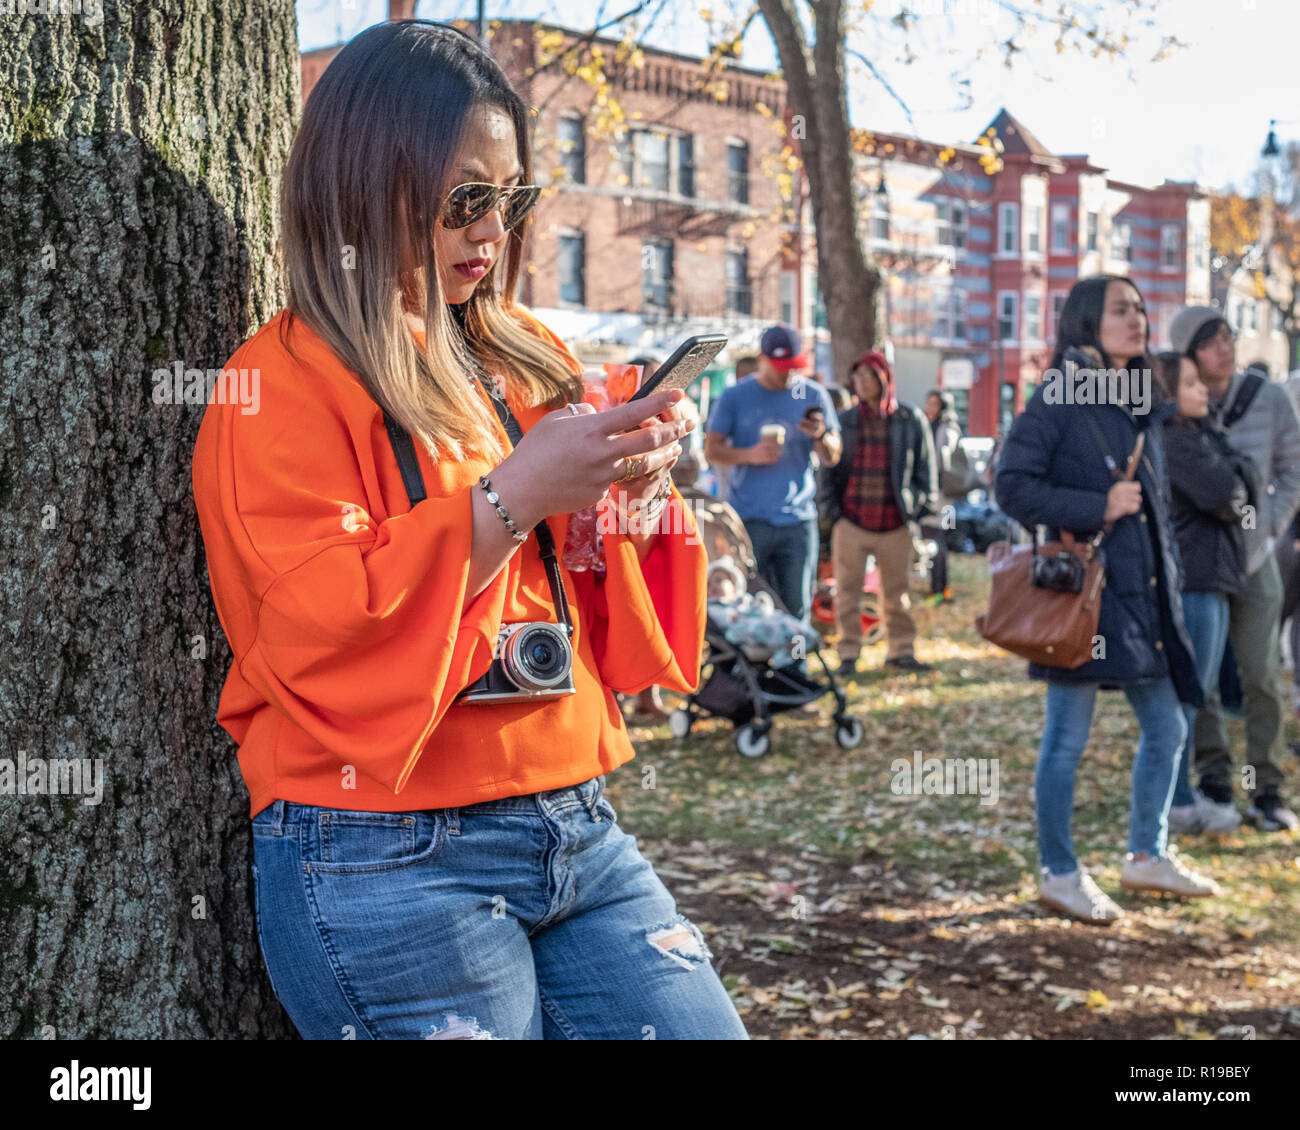 A woman texting on her mobile phone in Harvard Square, Cambridge, MA Stock Photo